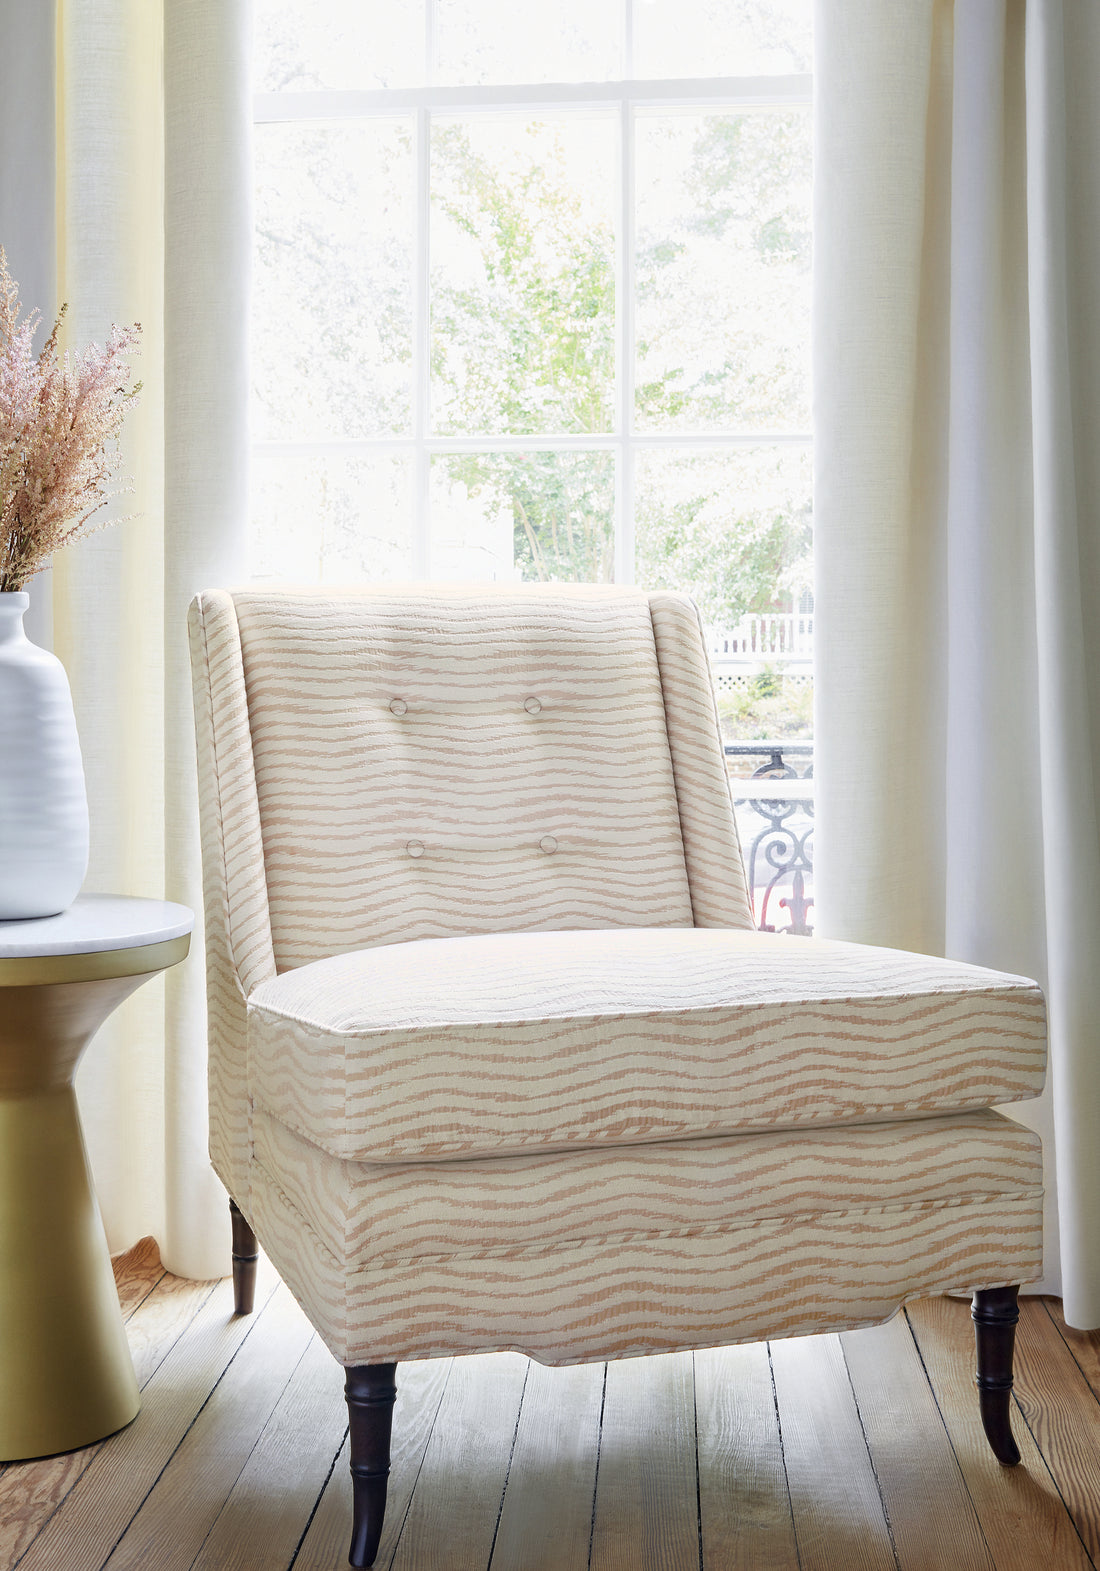 Frontal view of Bedford Chair in Capri woven fabric in blush color - pattern number W789150 - by Thibaut in the Reverie collection